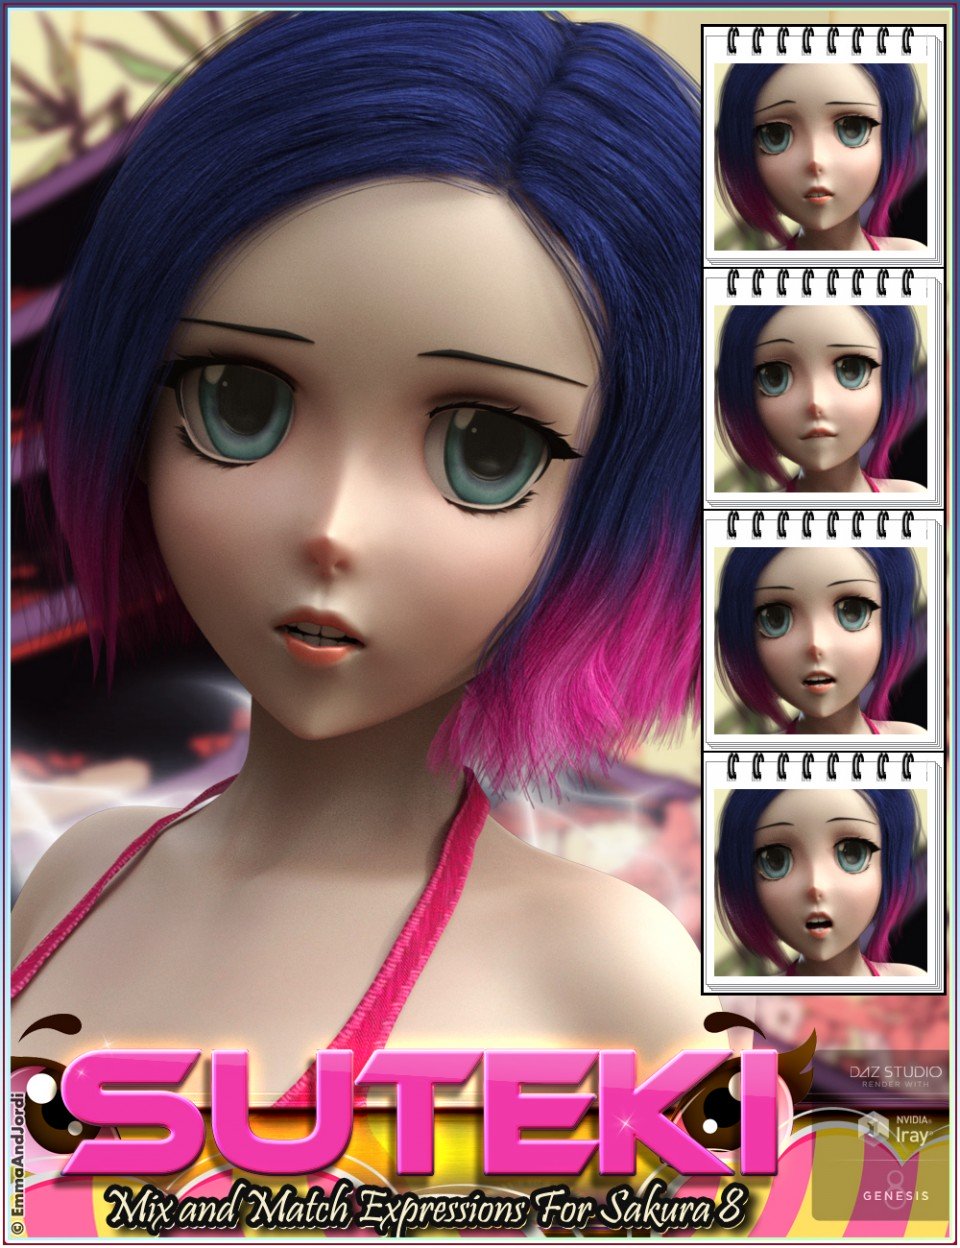 Suteki Mix and Match Expressions for Sakura 8 And Genesis 8 Female(s)_DAZ3D下载站